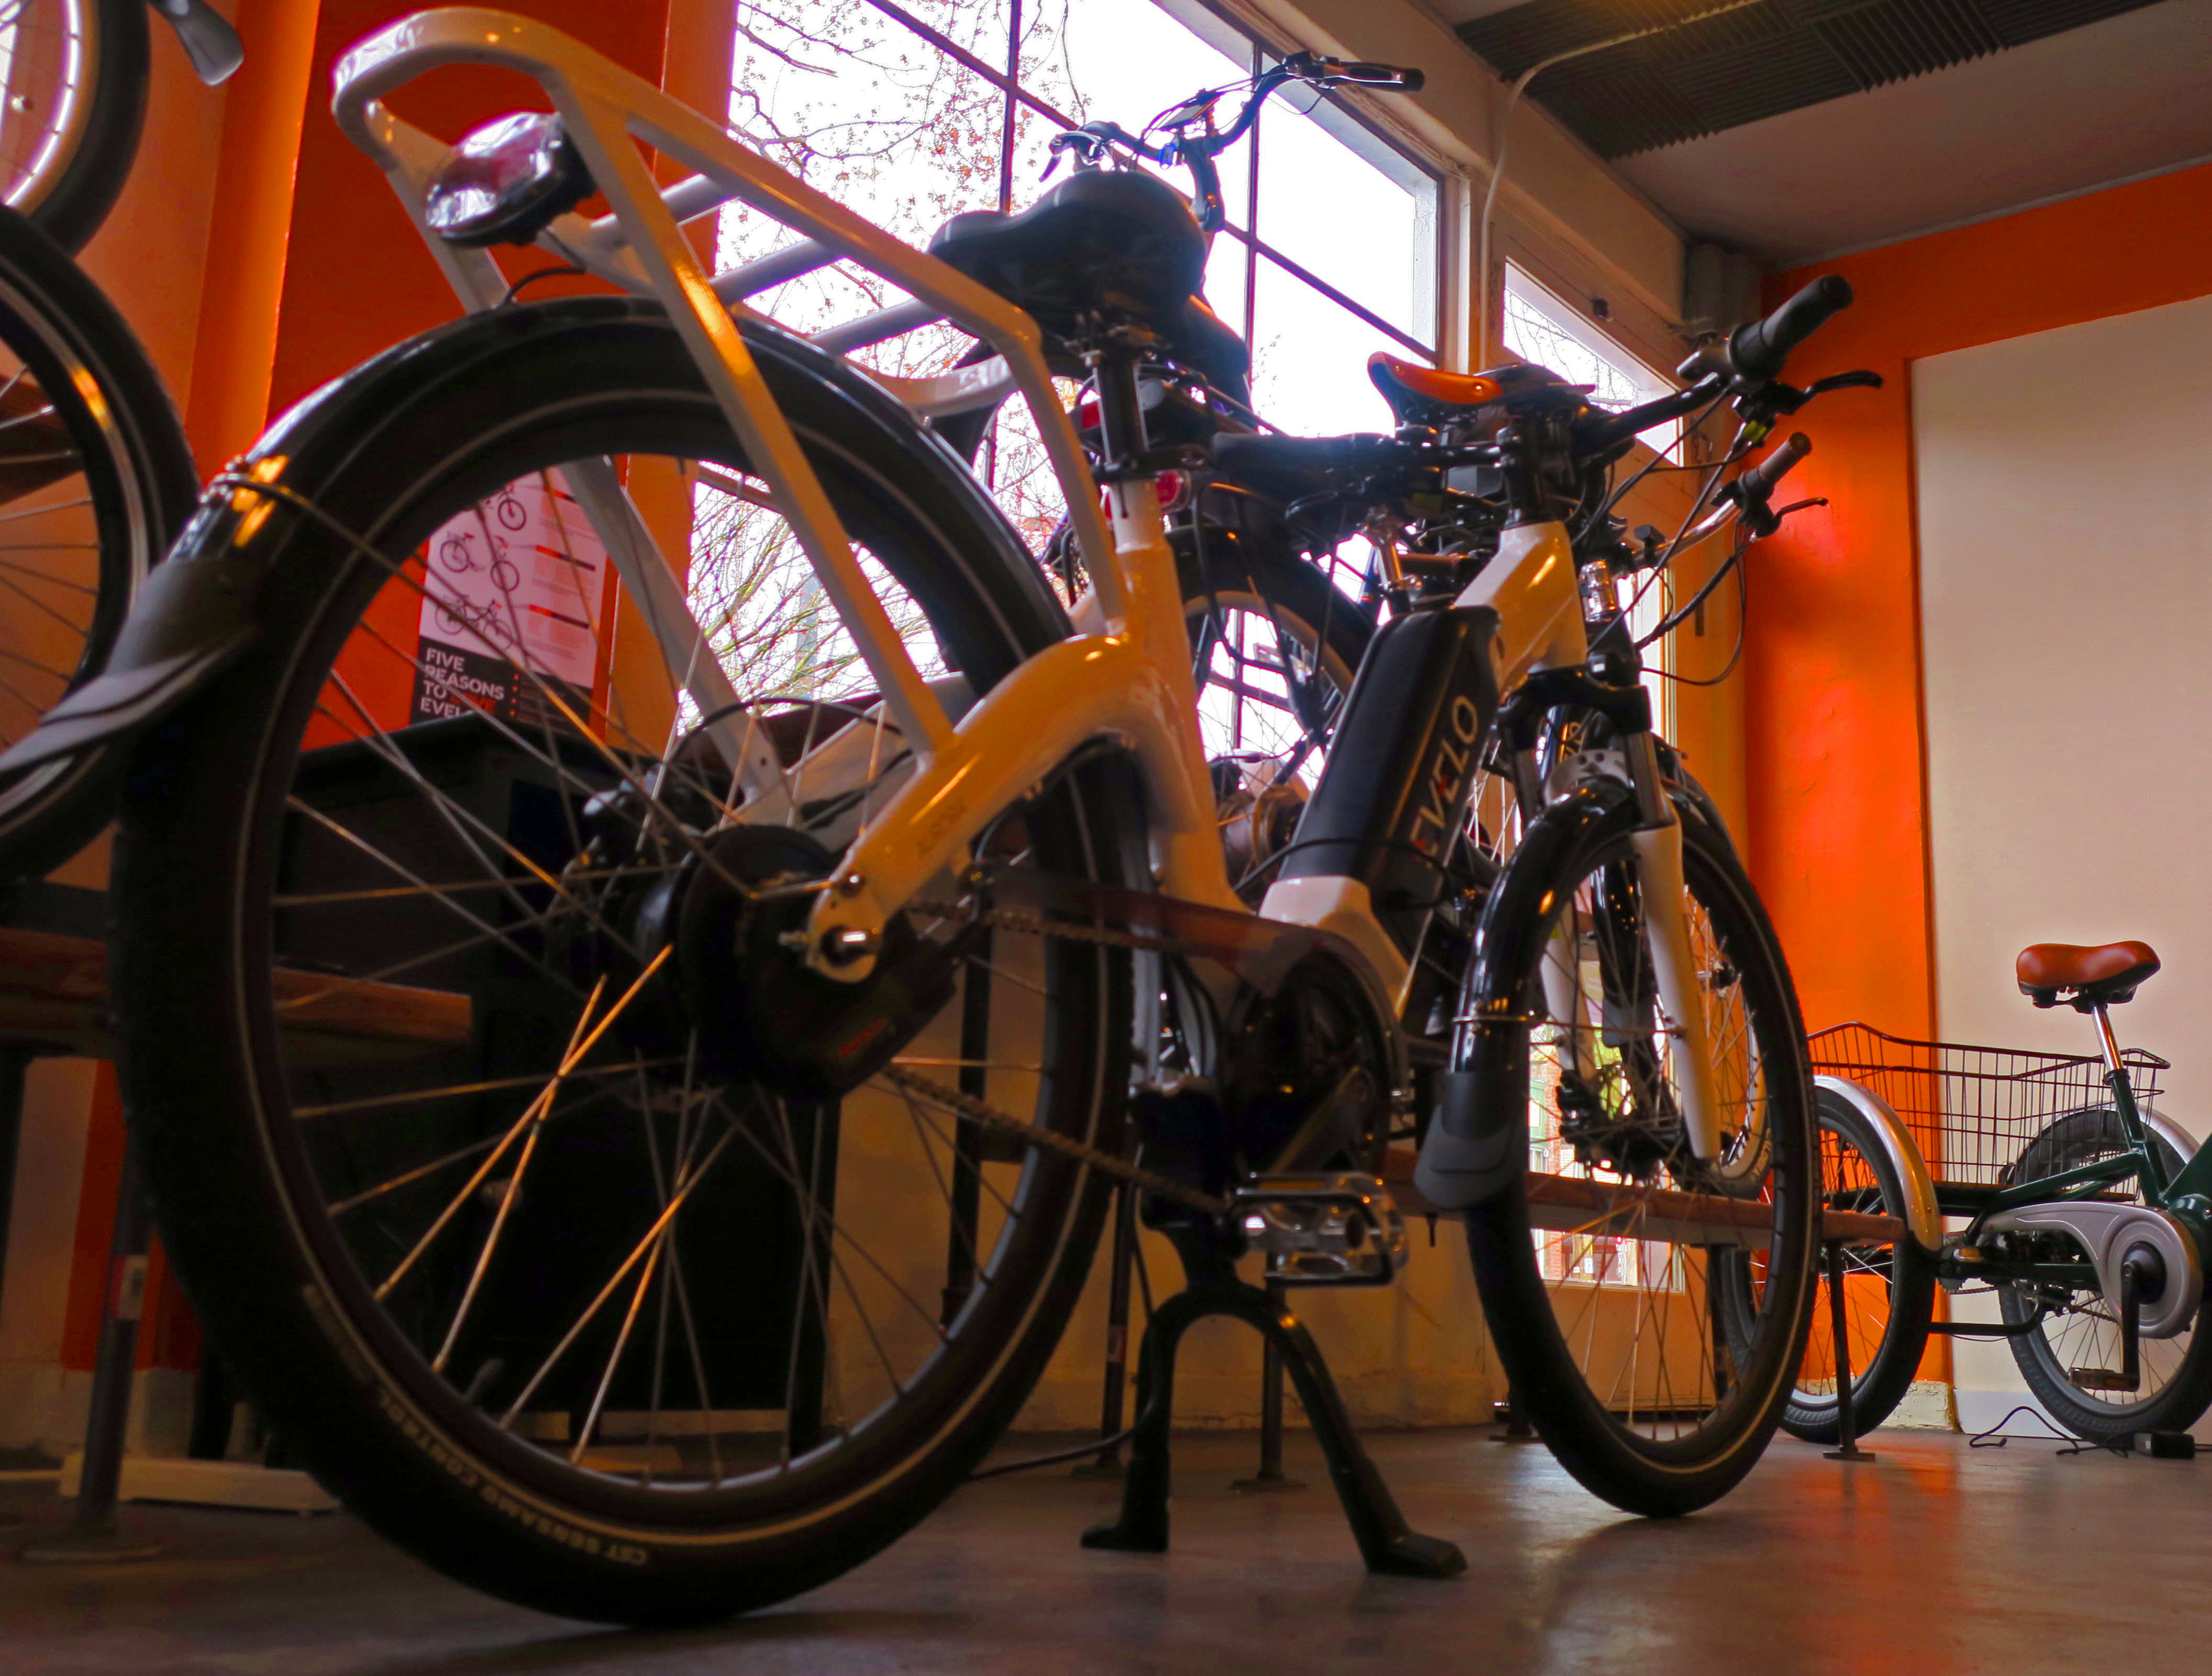 The Evelo showroom in the Madrona  Neighborhood features the companies direct-to-consumer e-bikes.